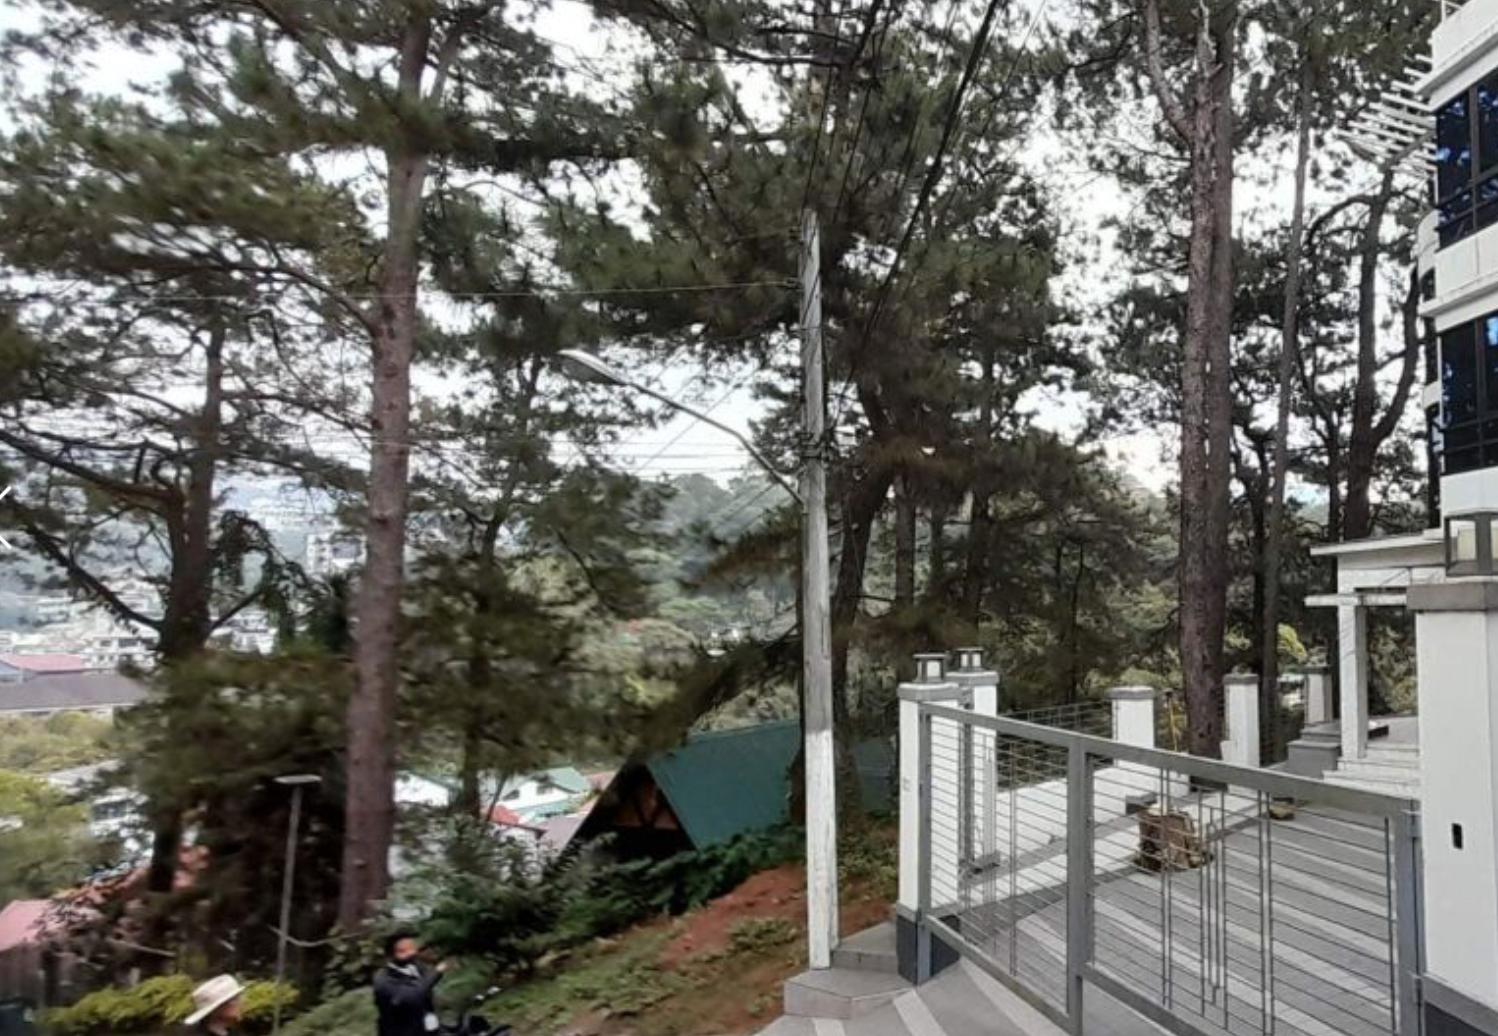 Architecturally modern design 4-story residential building in Camp 7 Baguio City - Image# 18